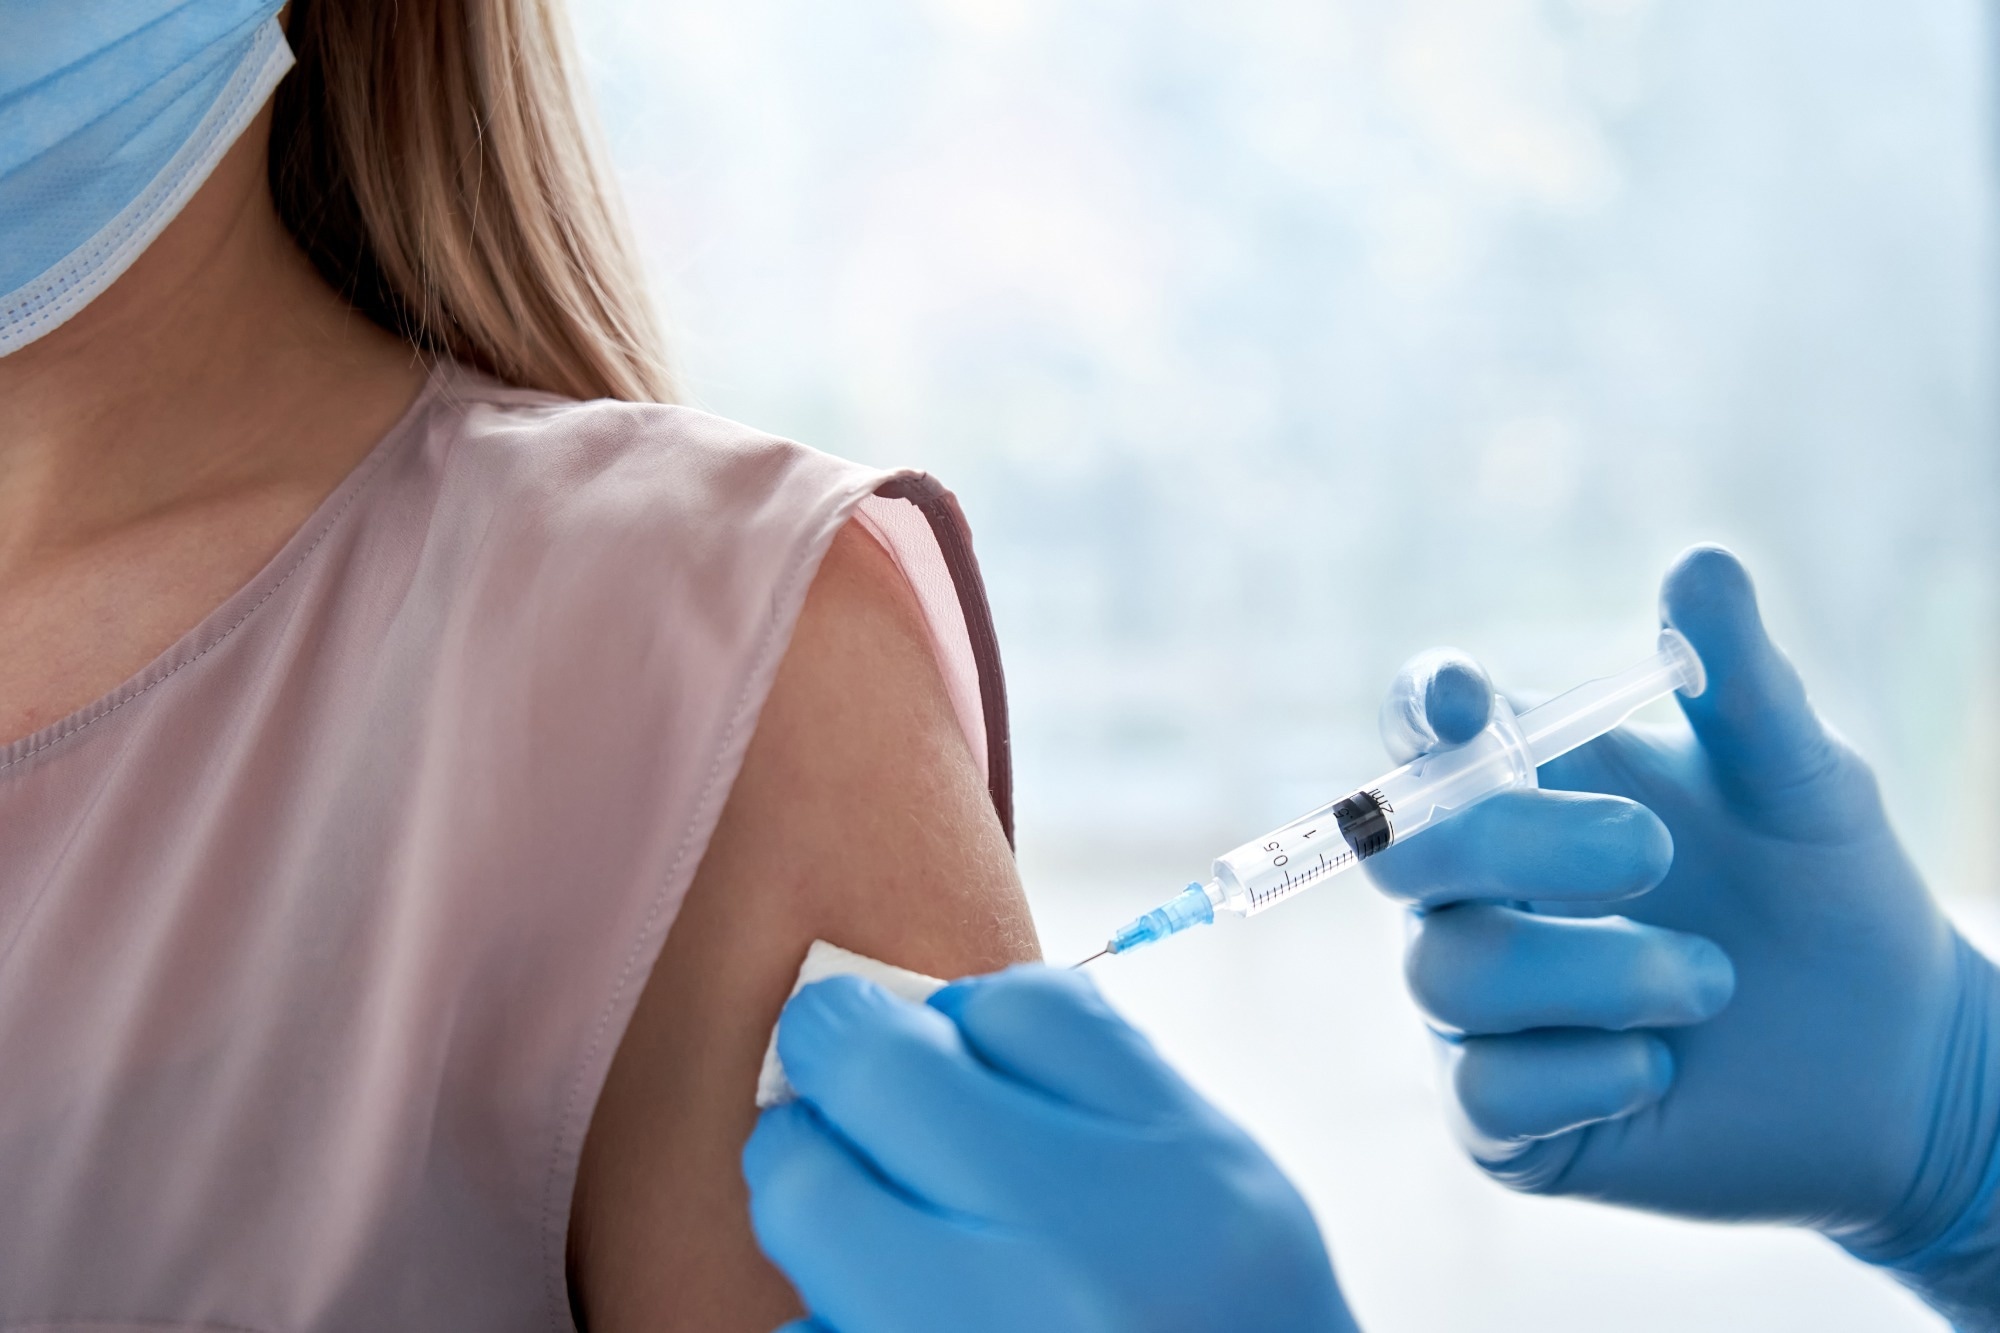 Study: COVID-19 vaccination and menstrual cycle characteristics: A prospective cohort study. Image Credit: GroundPicture/Shutterstock.com